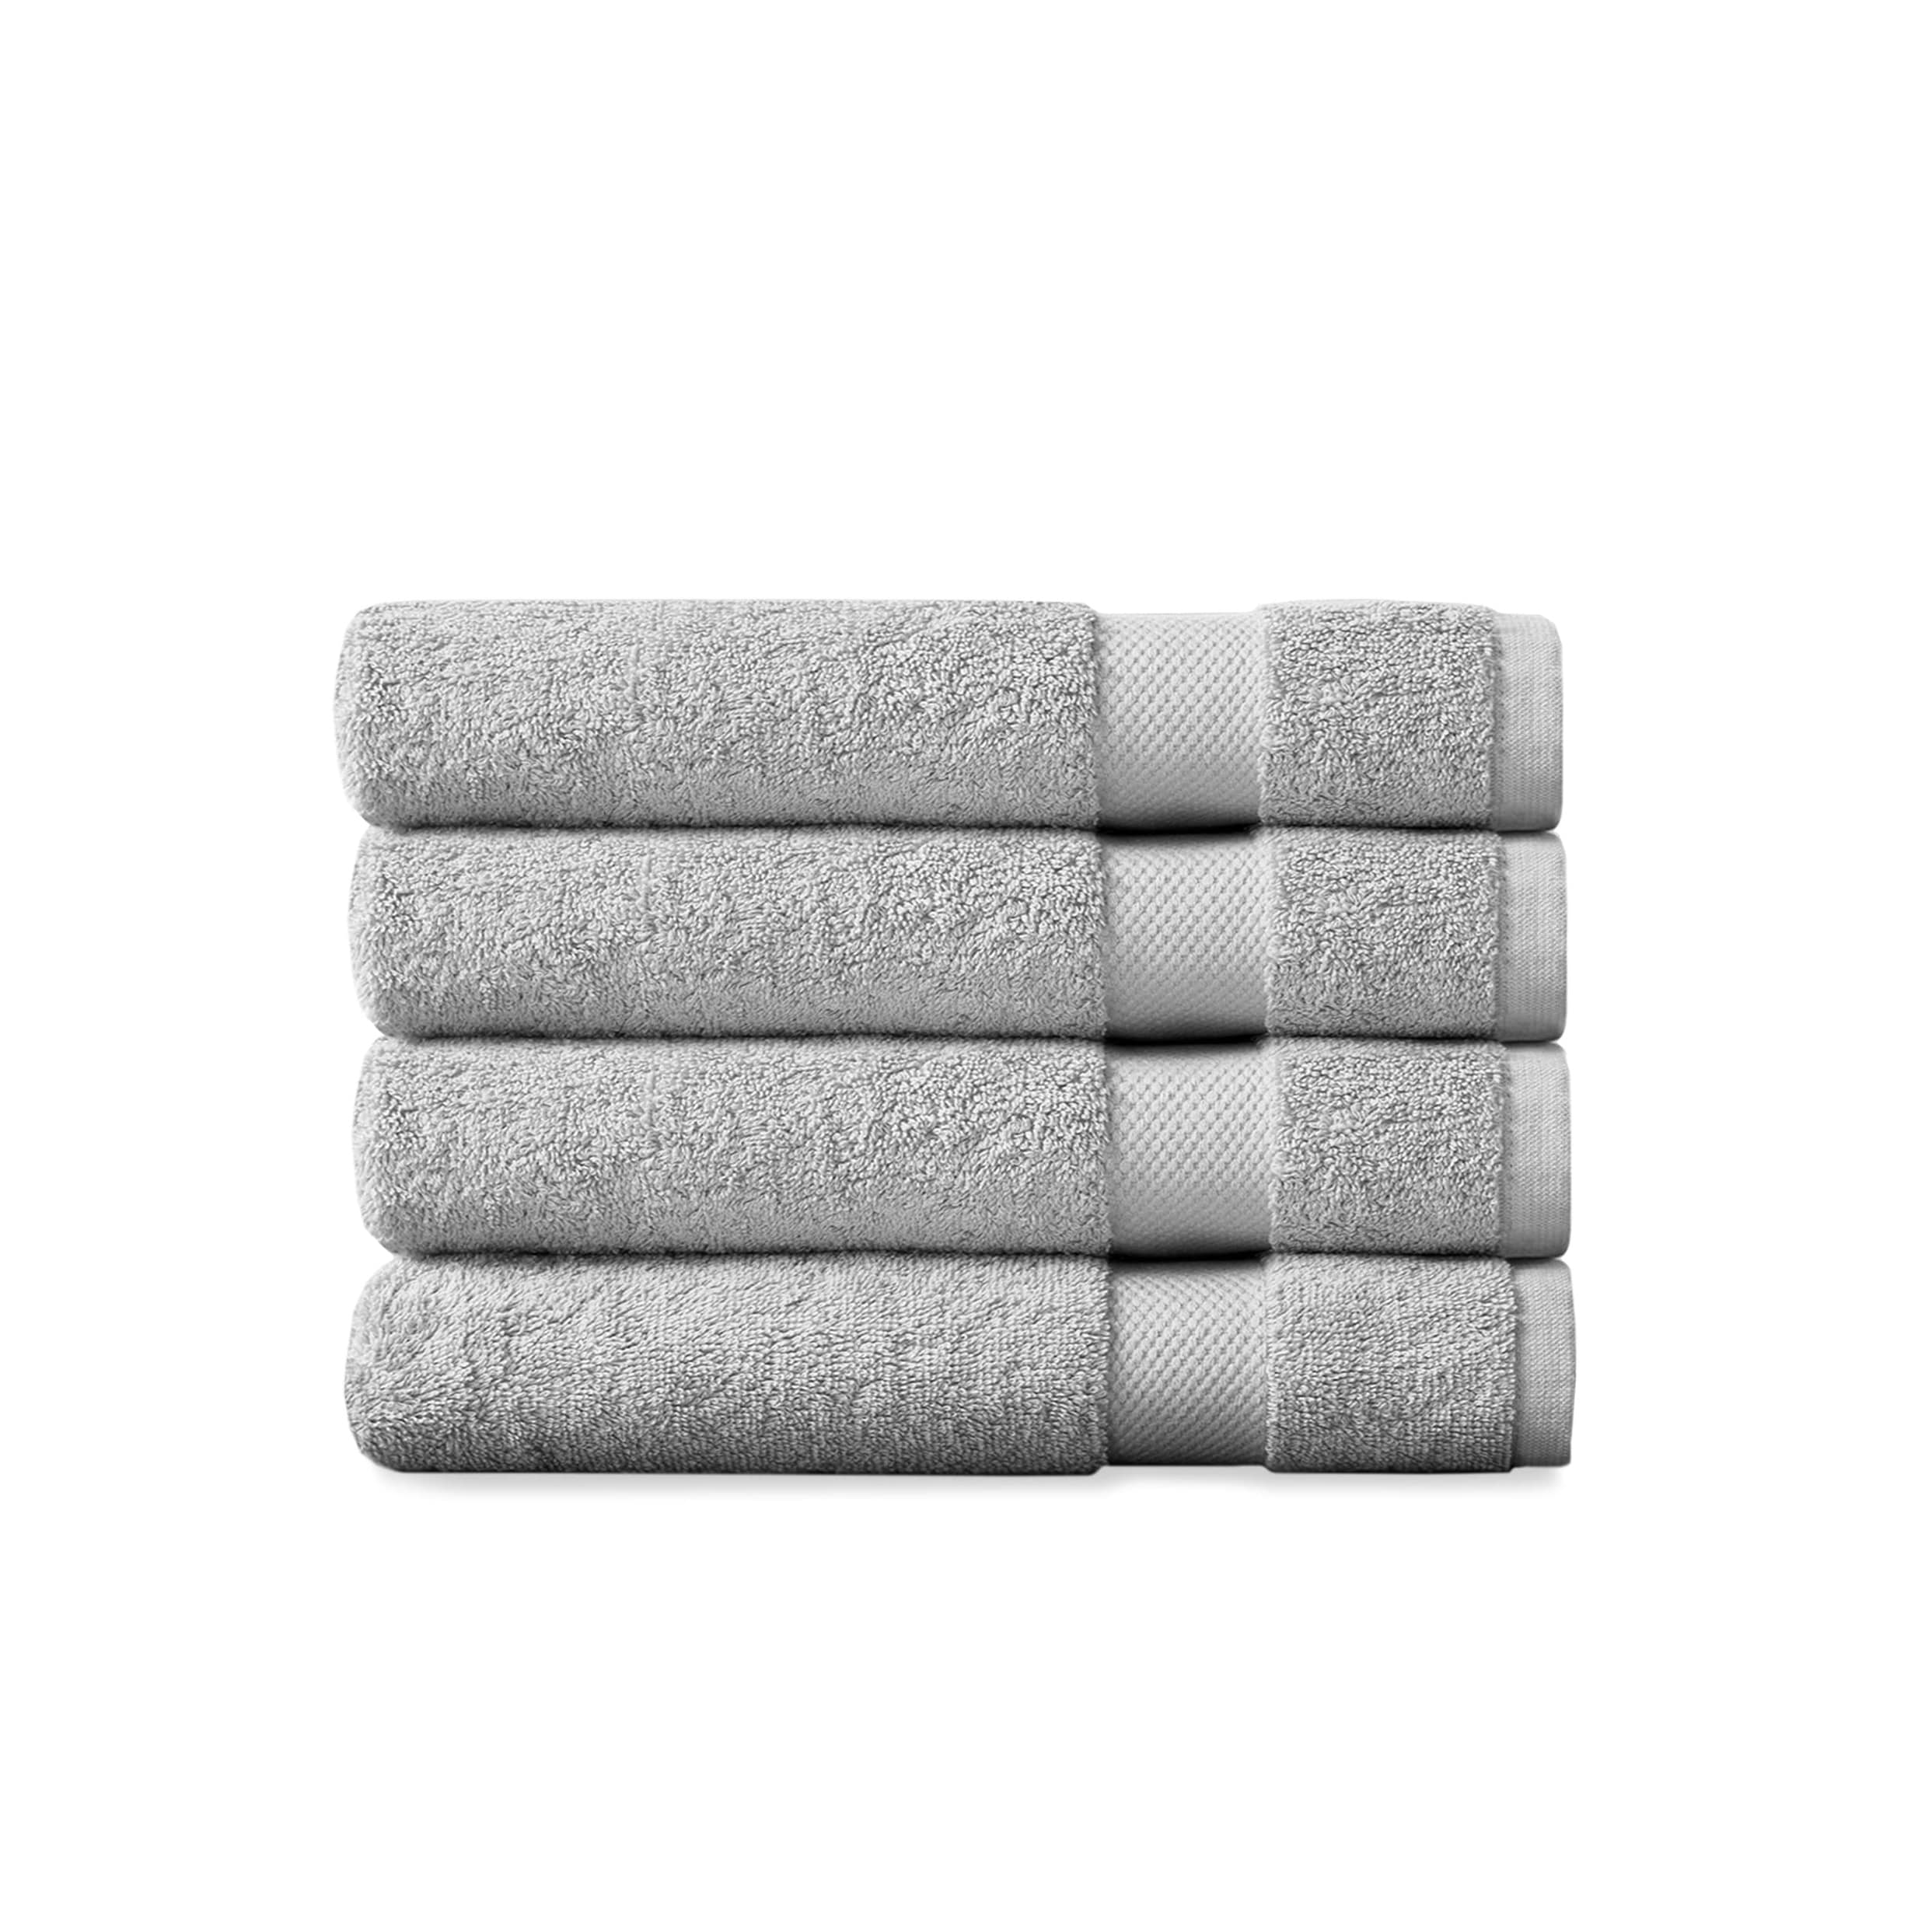 Ample Decor Bath Towel 30 x 54 inch Pack of 8 600 GSM 100% Cotton, Soft  Absorbent, Lightweight, Quick Drying, Machine Washable for Hotel, Gym,  Kitchen